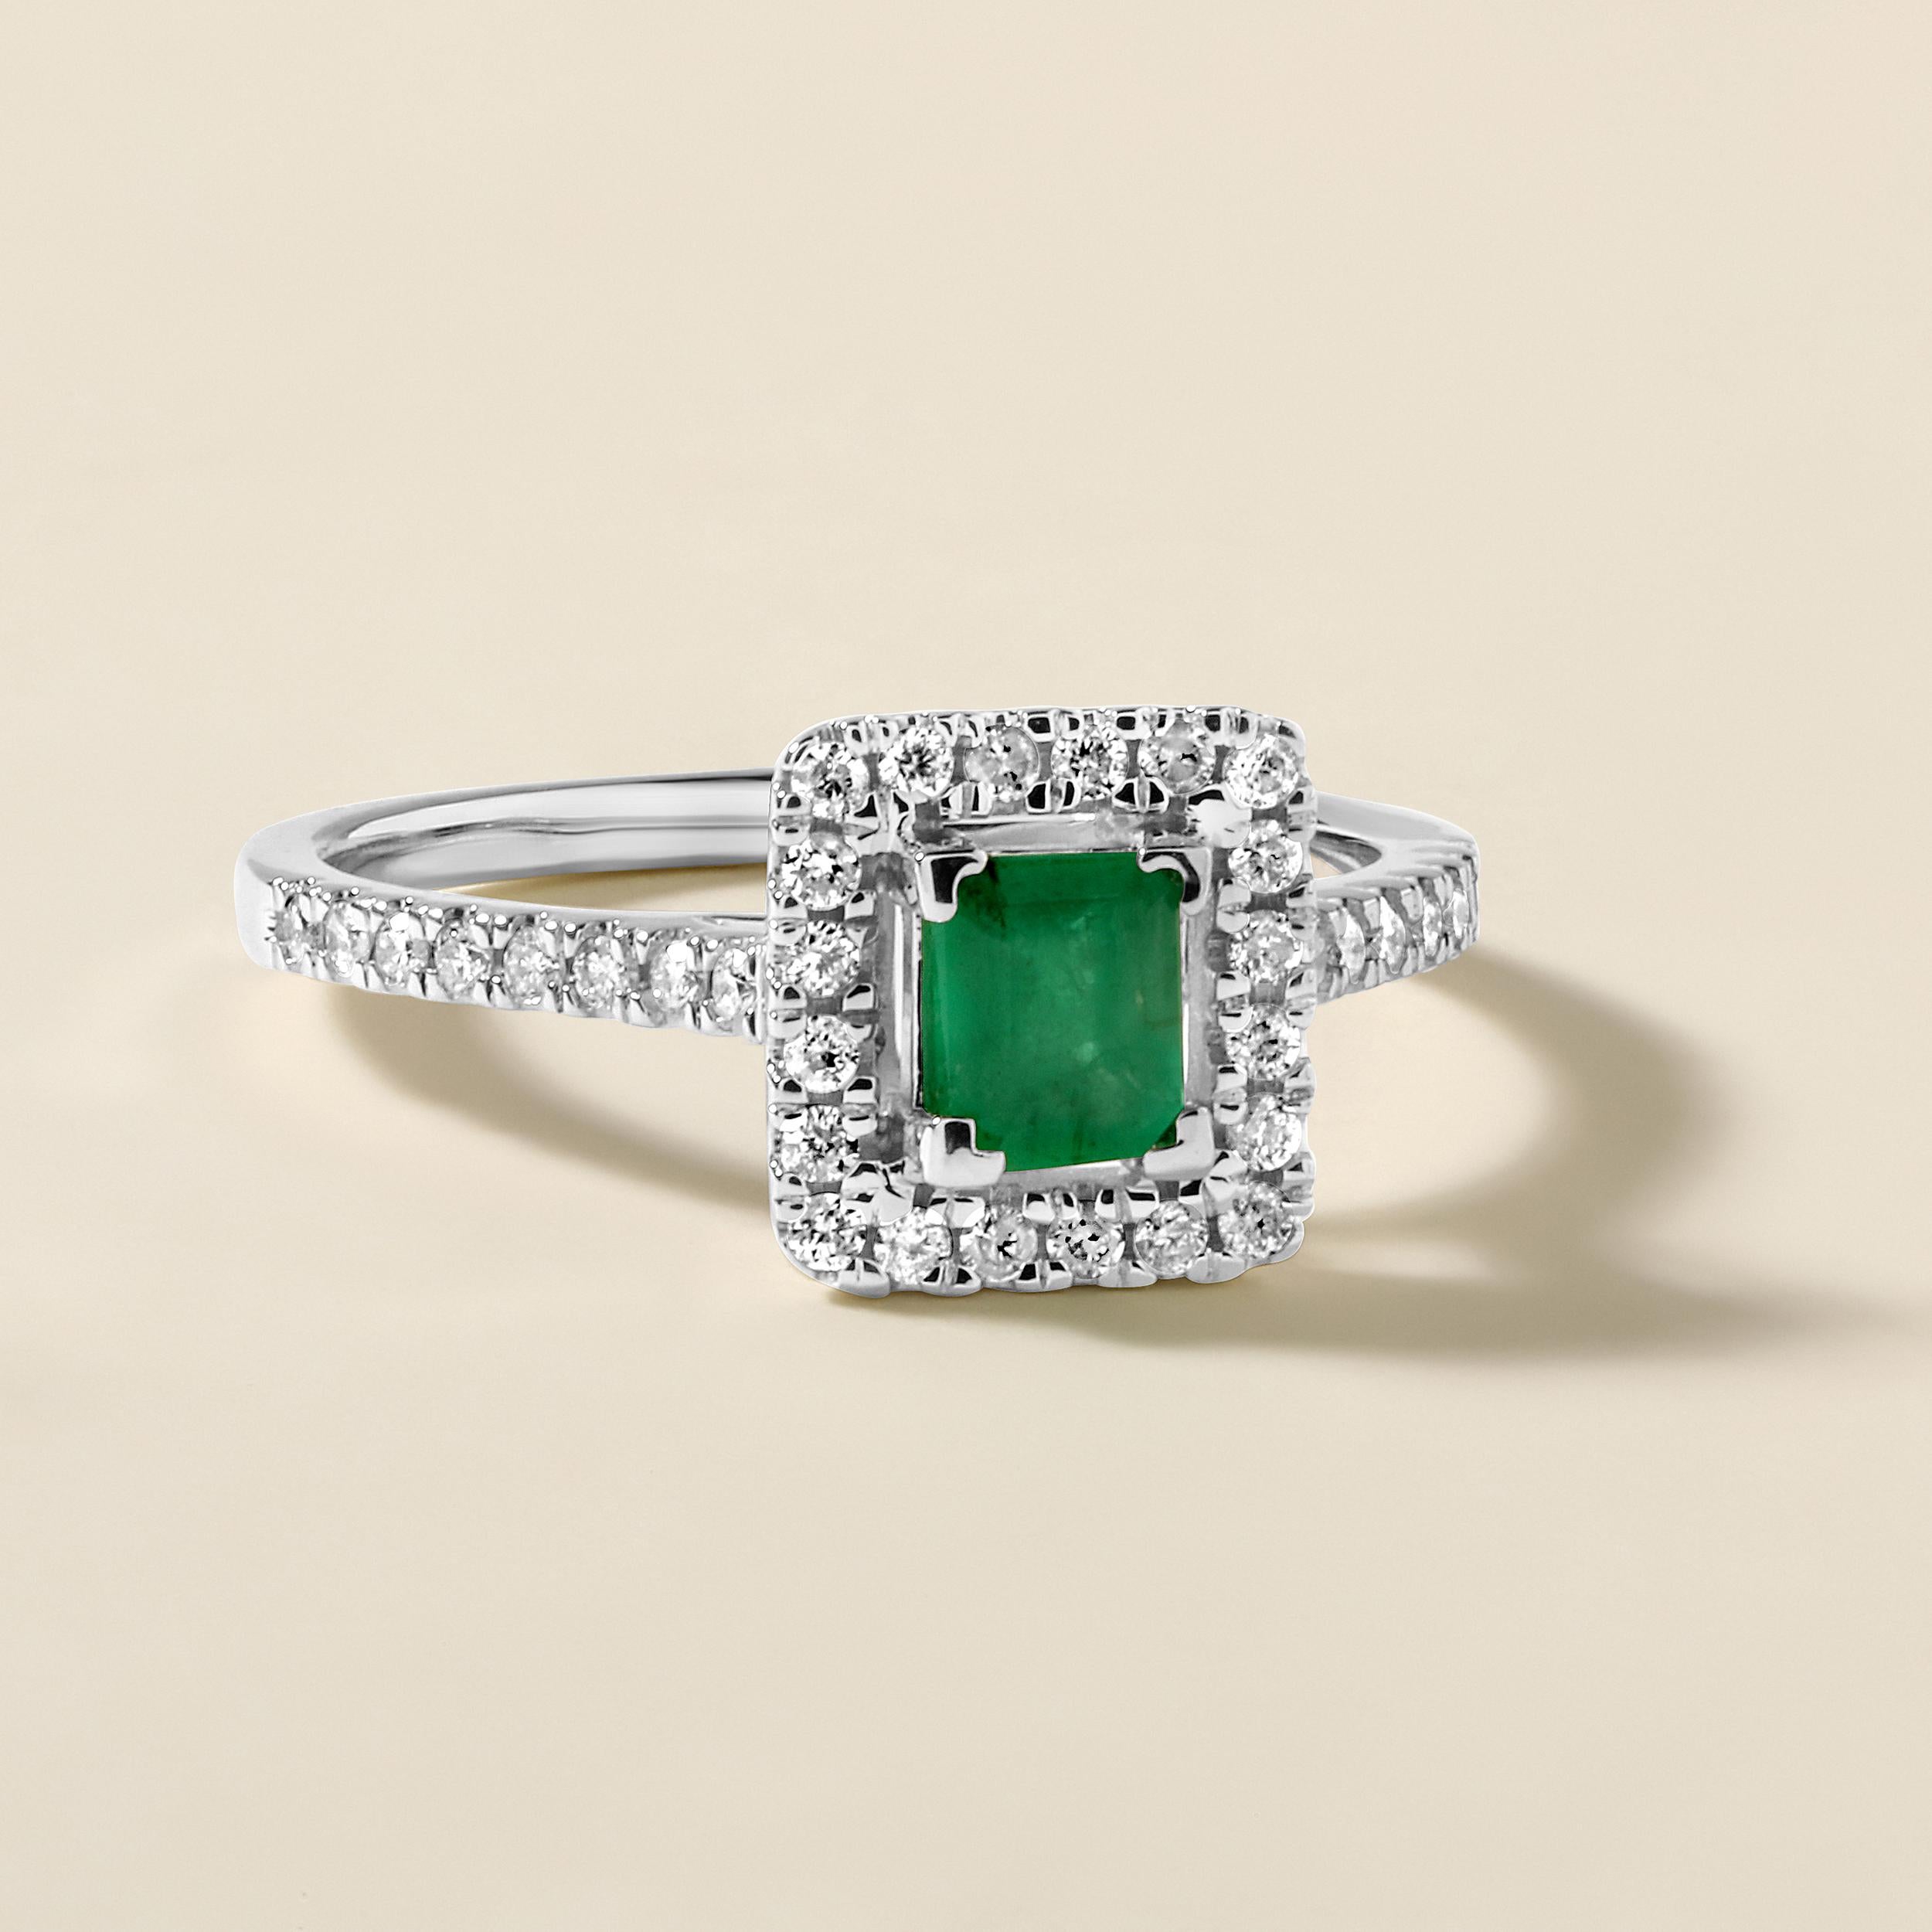 Ring Size: US 7

Crafted in 2.77 grams of 14K White Gold, the ring contains 36 stones of Round Natural Diamonds with a total of 0.29 carat in G-H color and I1-I2 clarity combined with 1 stone of Natural Emerald Gemstone with a total of 0.47